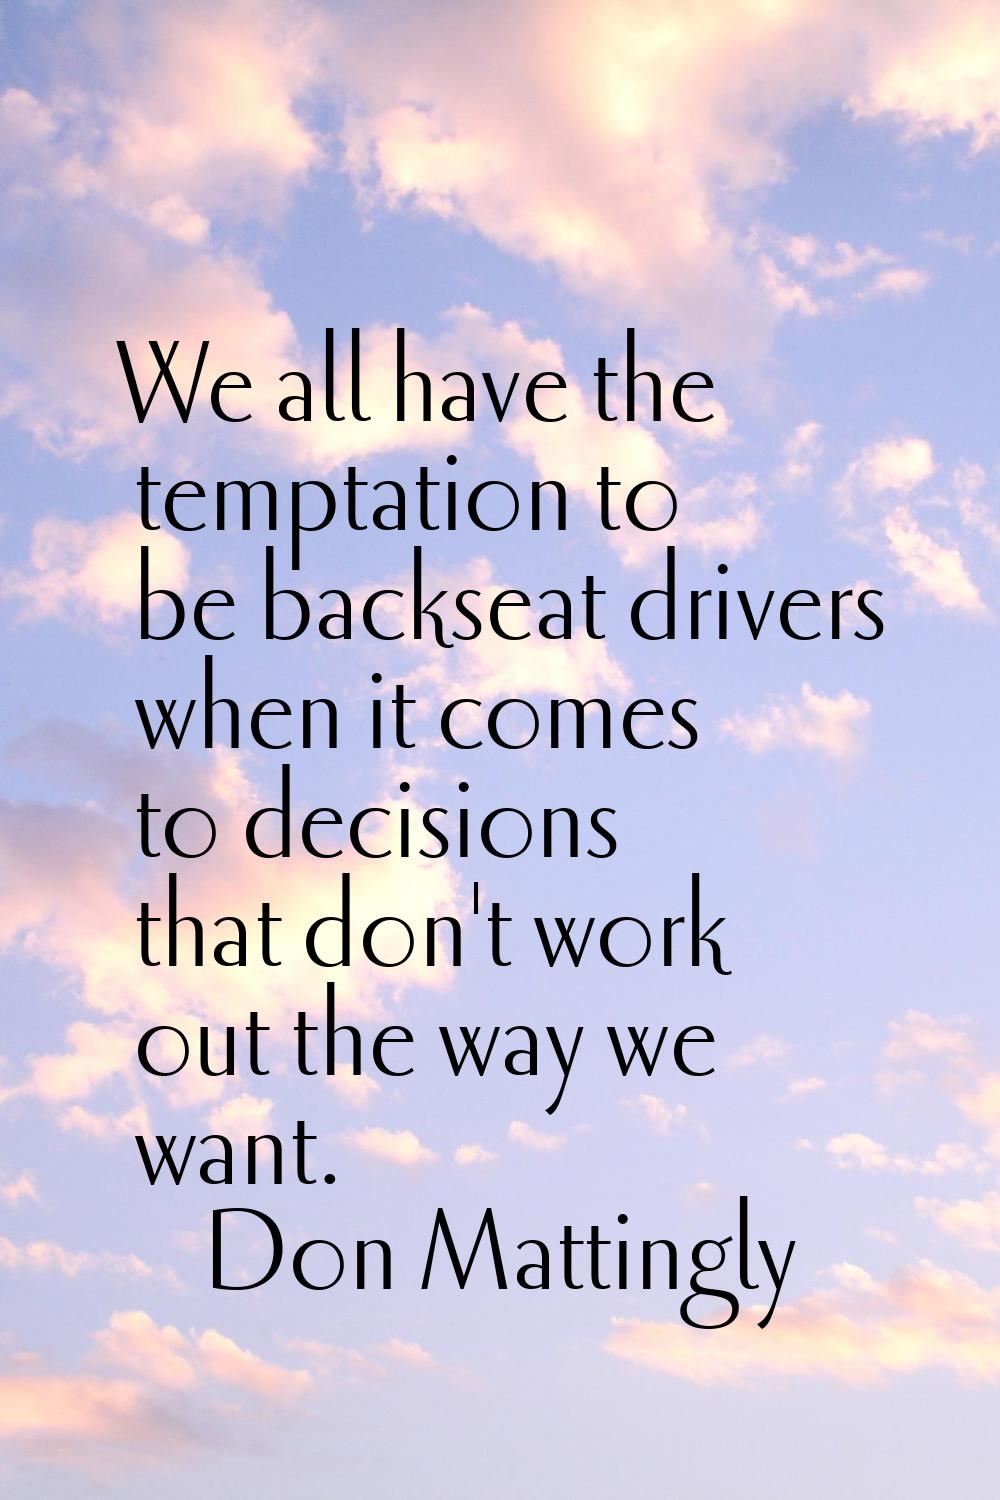 We all have the temptation to be backseat drivers when it comes to decisions that don't work out th